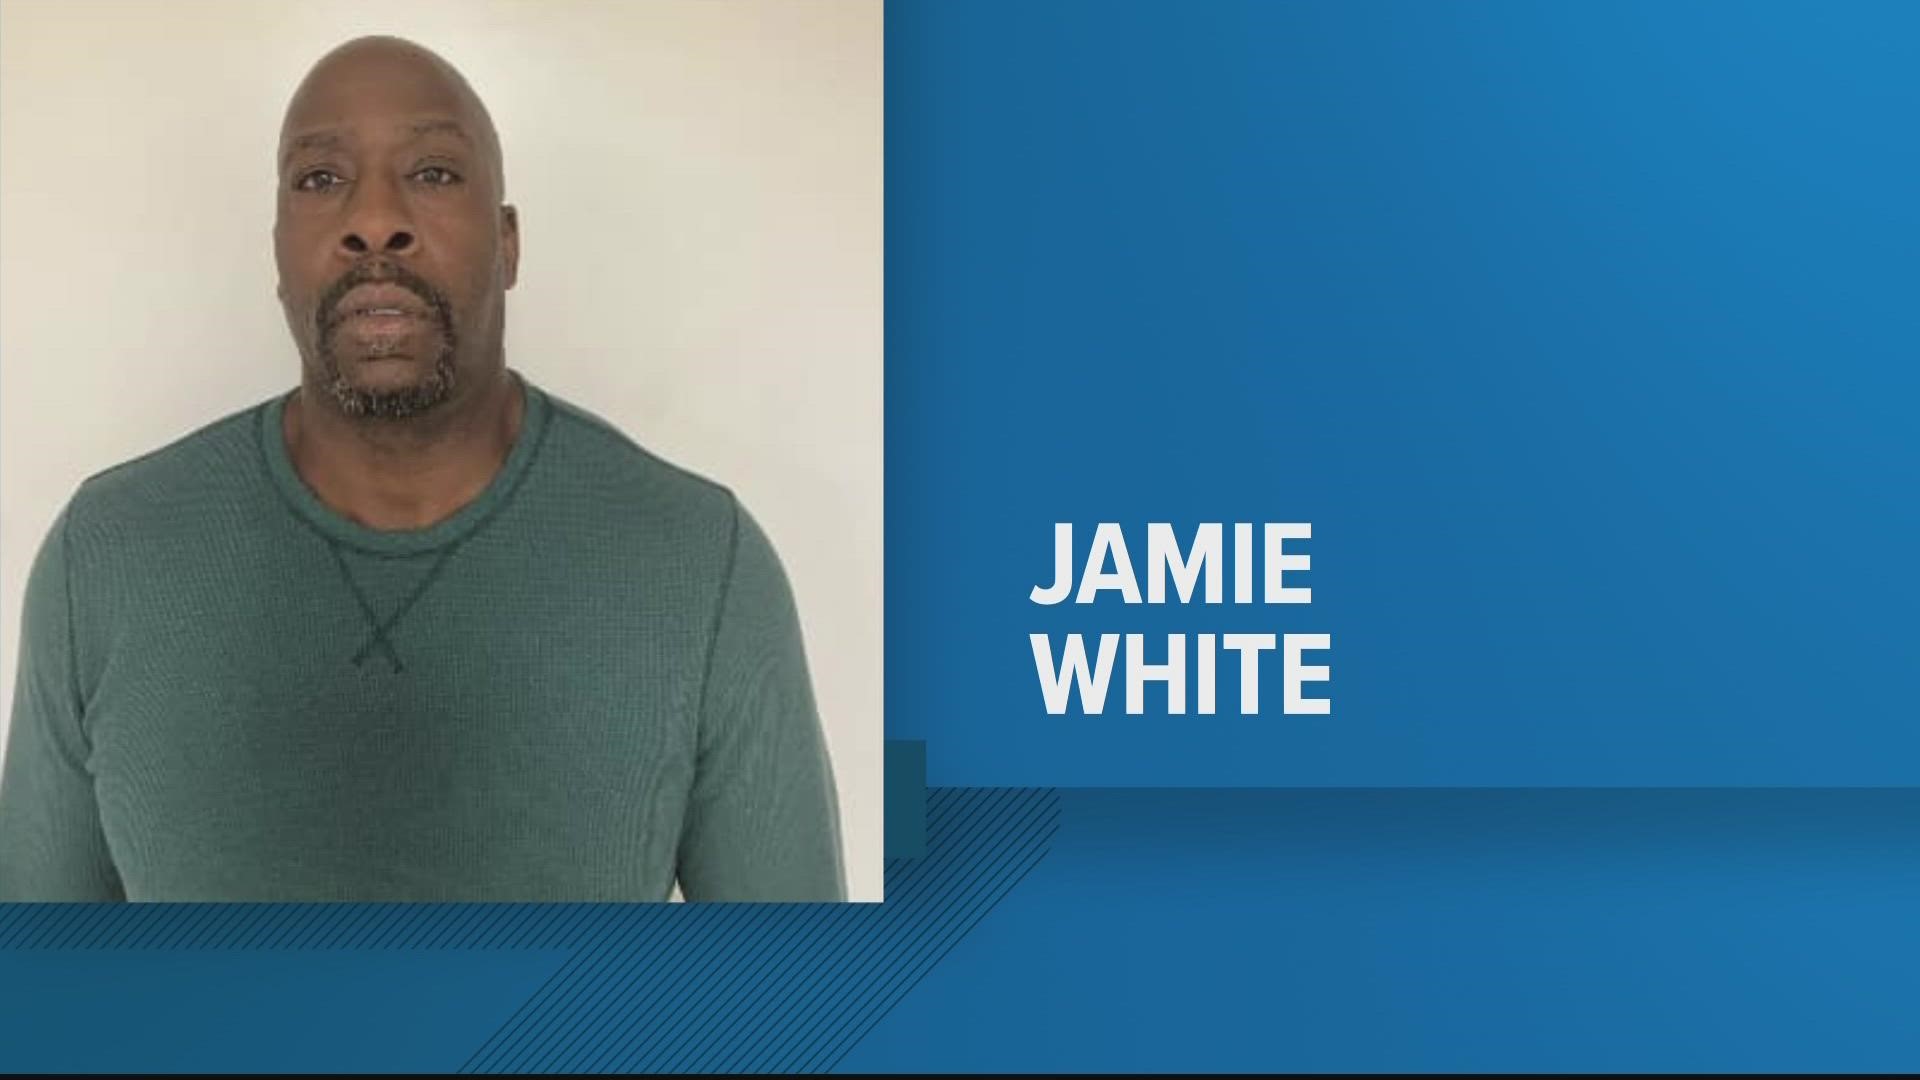 Greenbelt Police claim Jamie White, 45, of Hyattsville, exposed himself to multiple people at Buddy Attick Lake Park Tuesday morning.